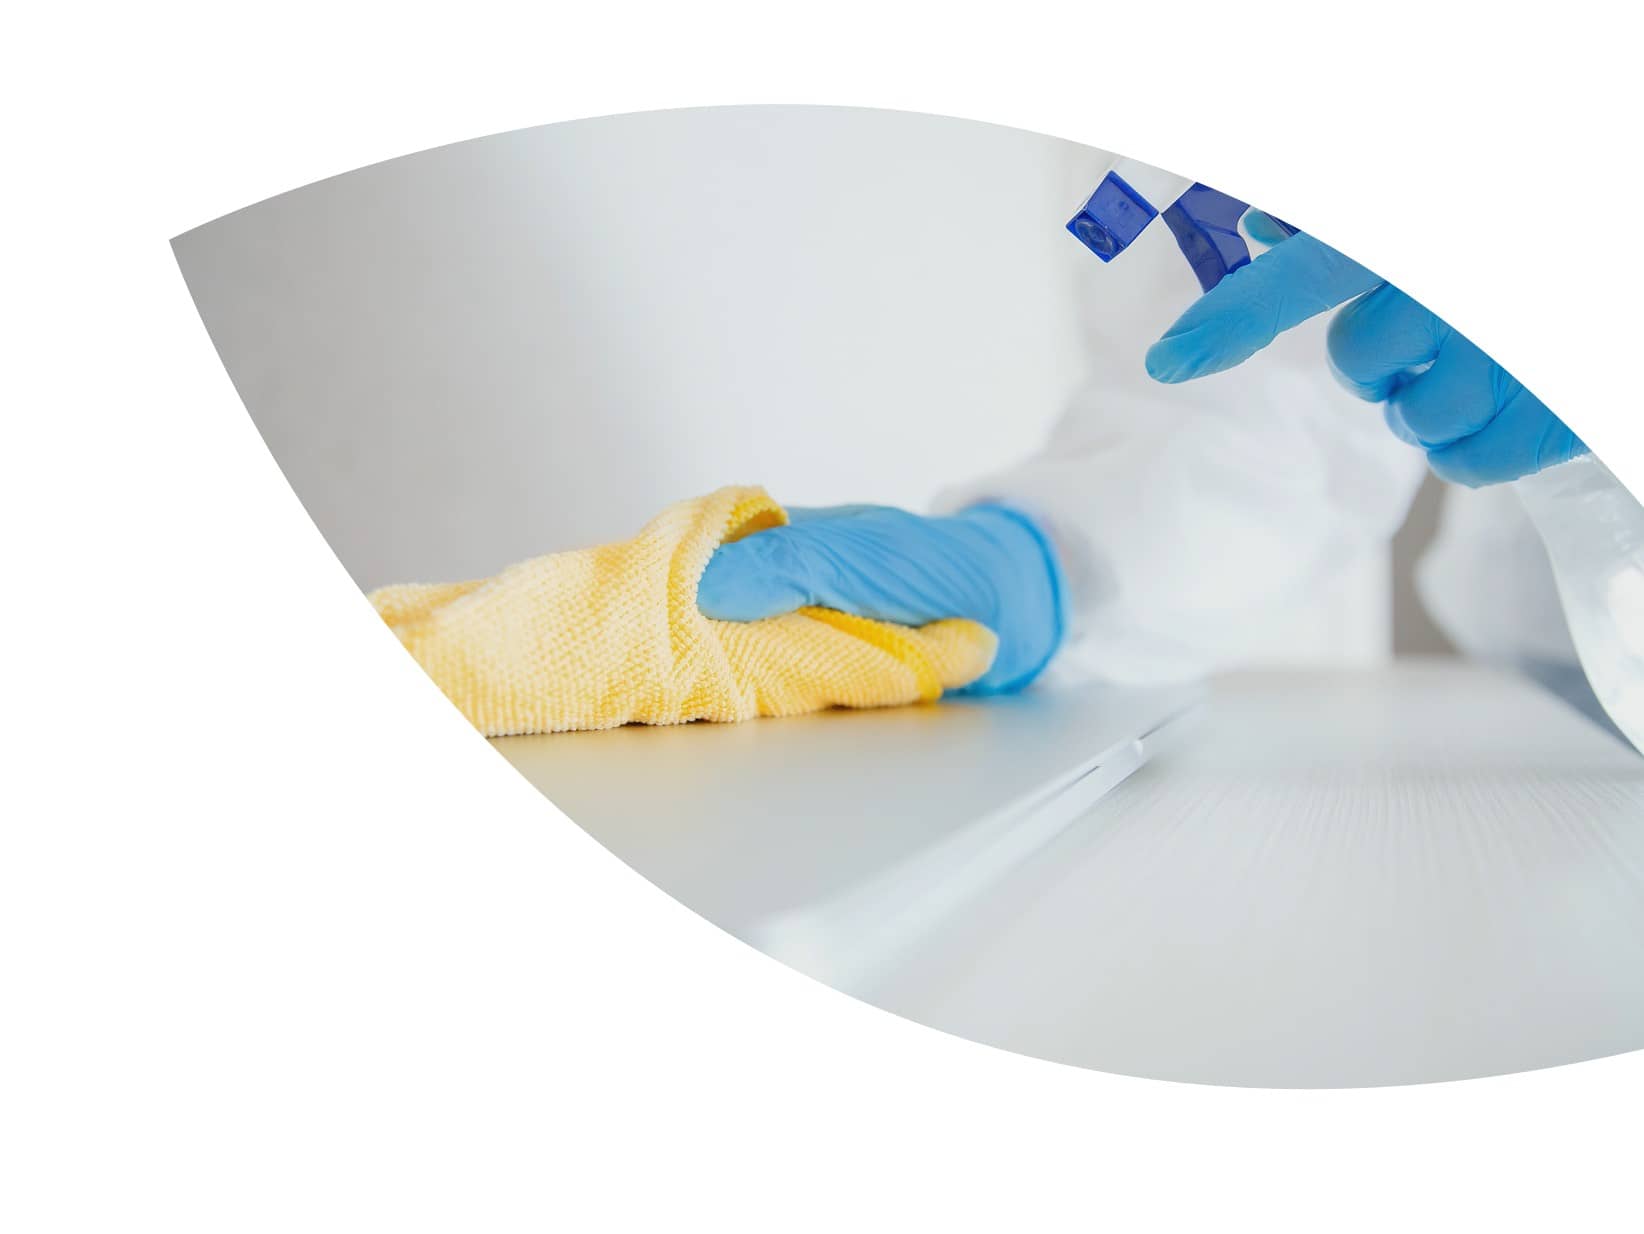 high-quality cleaning services to clients across London